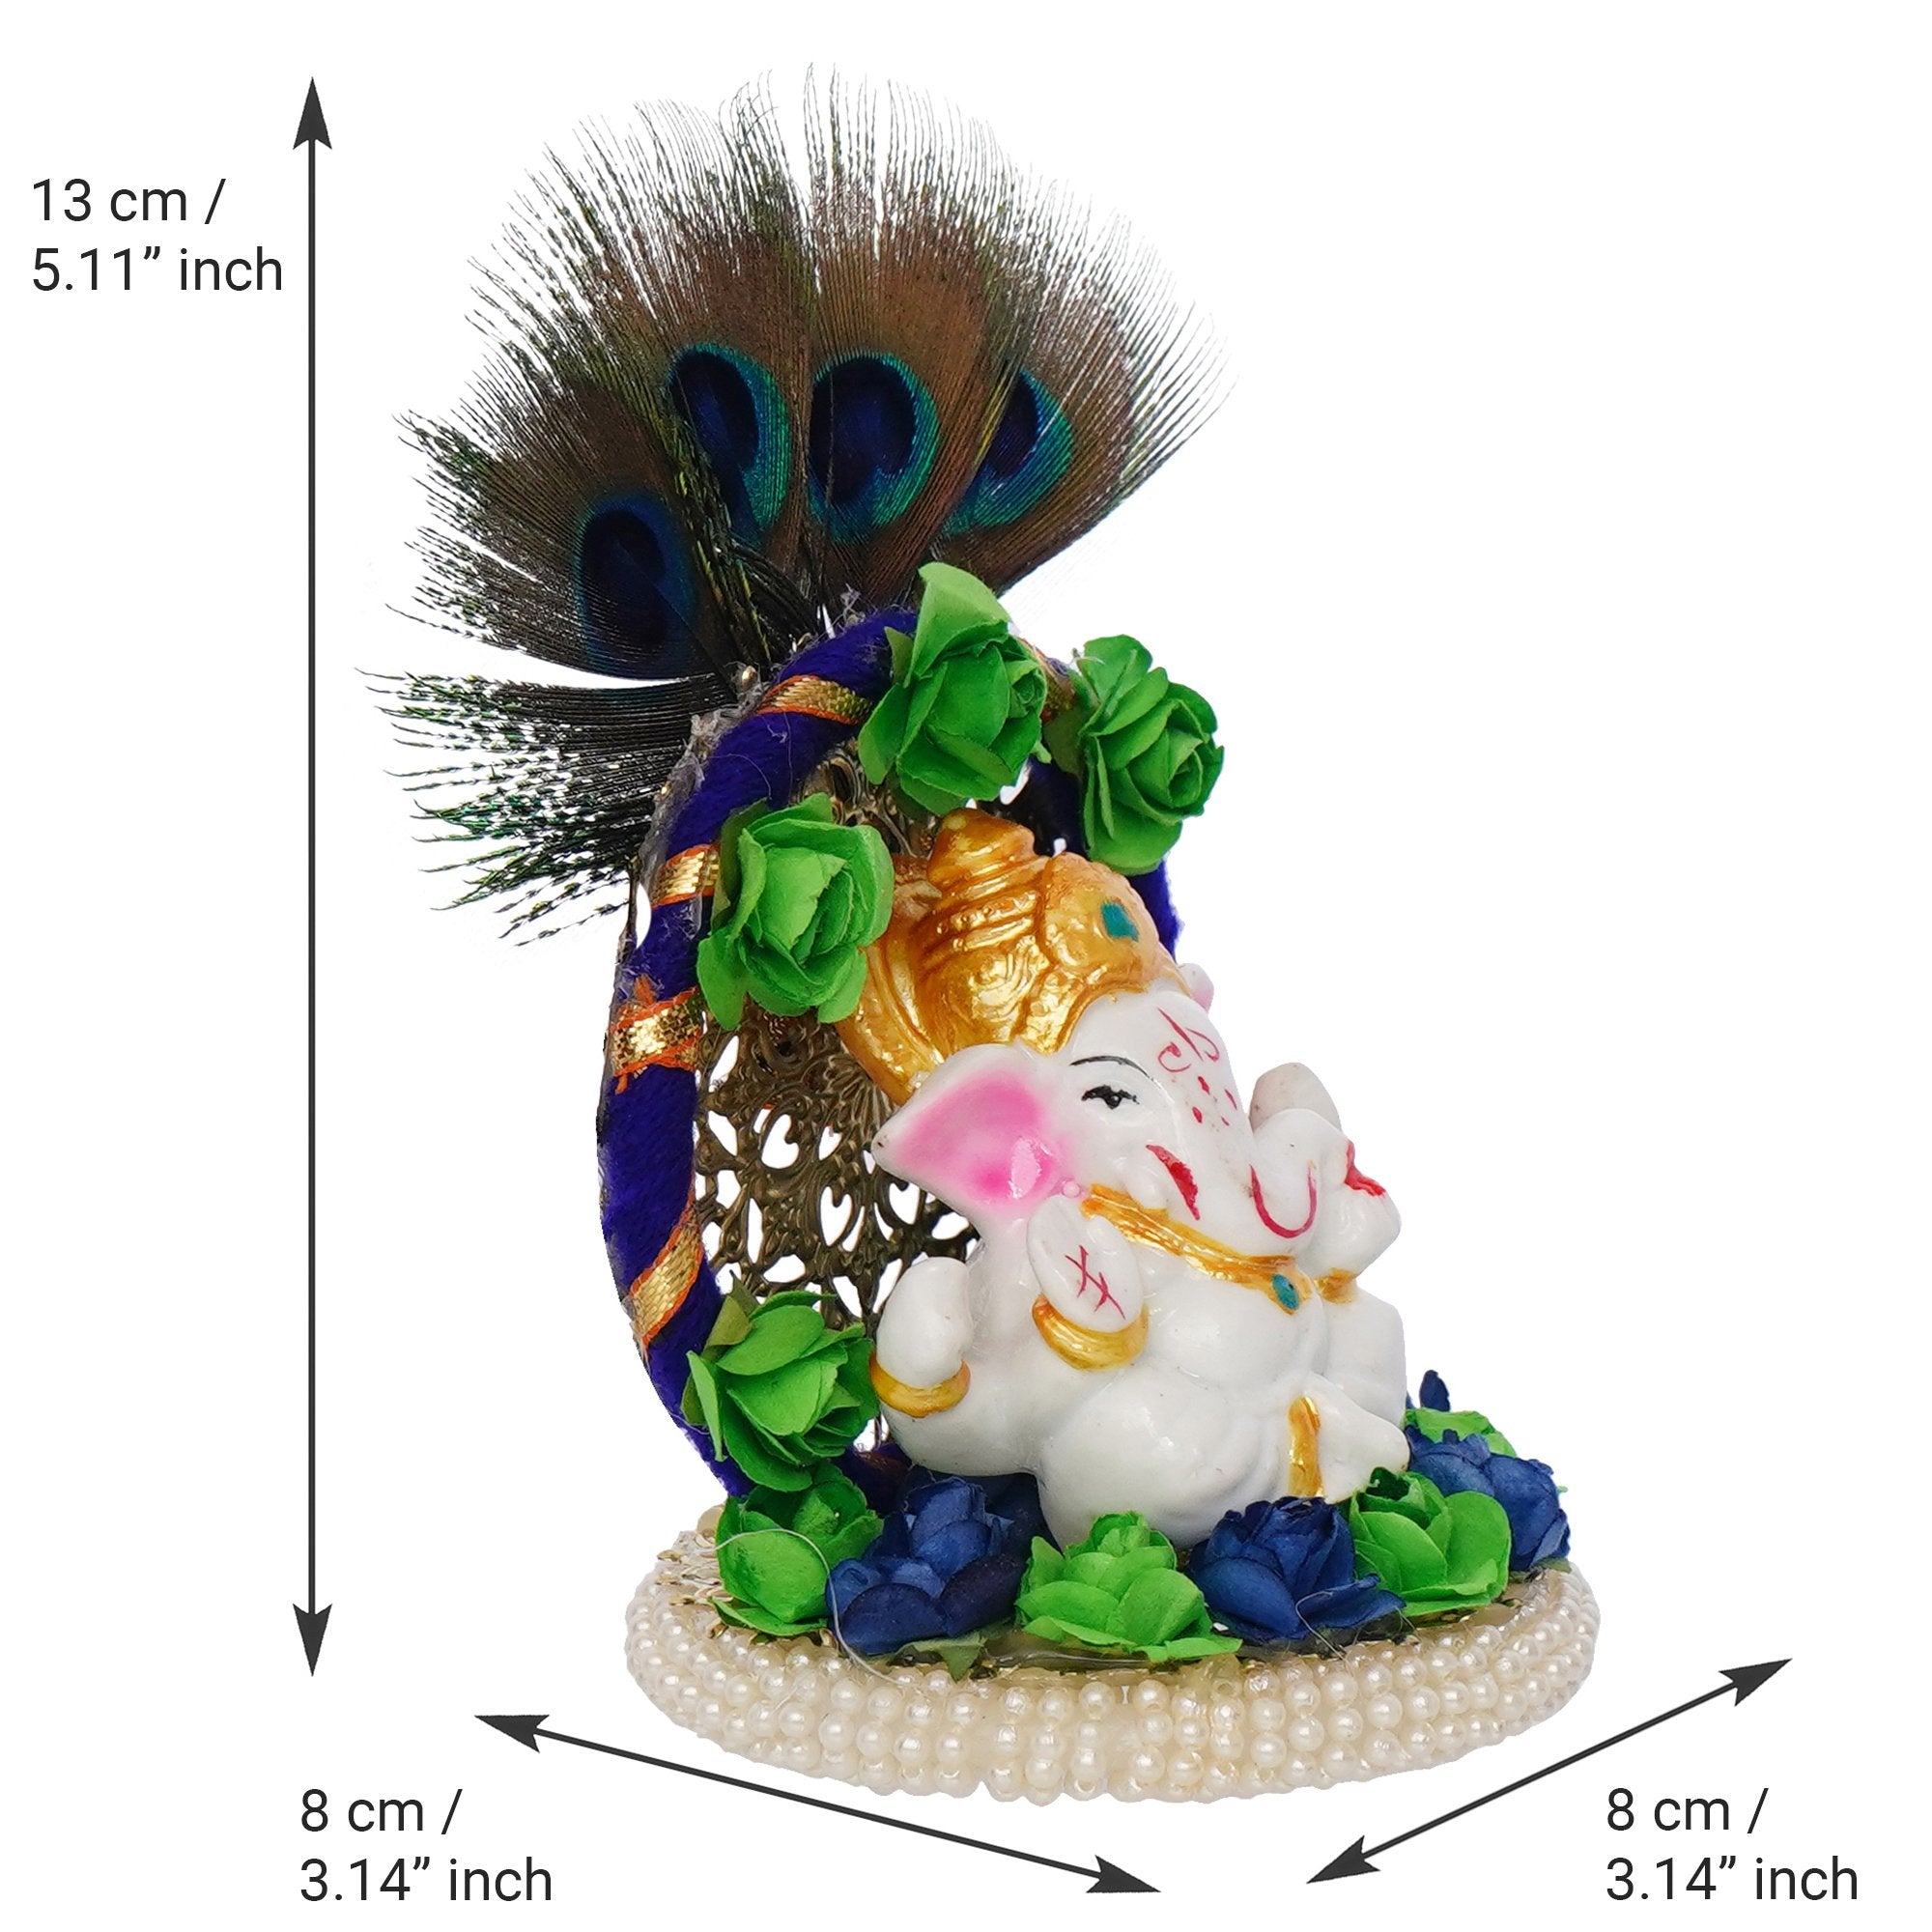 Polyresin Lord Ganesha Idol on Handcrafted Peacock Feather Floral Plate for Home and Car Dashboard 3